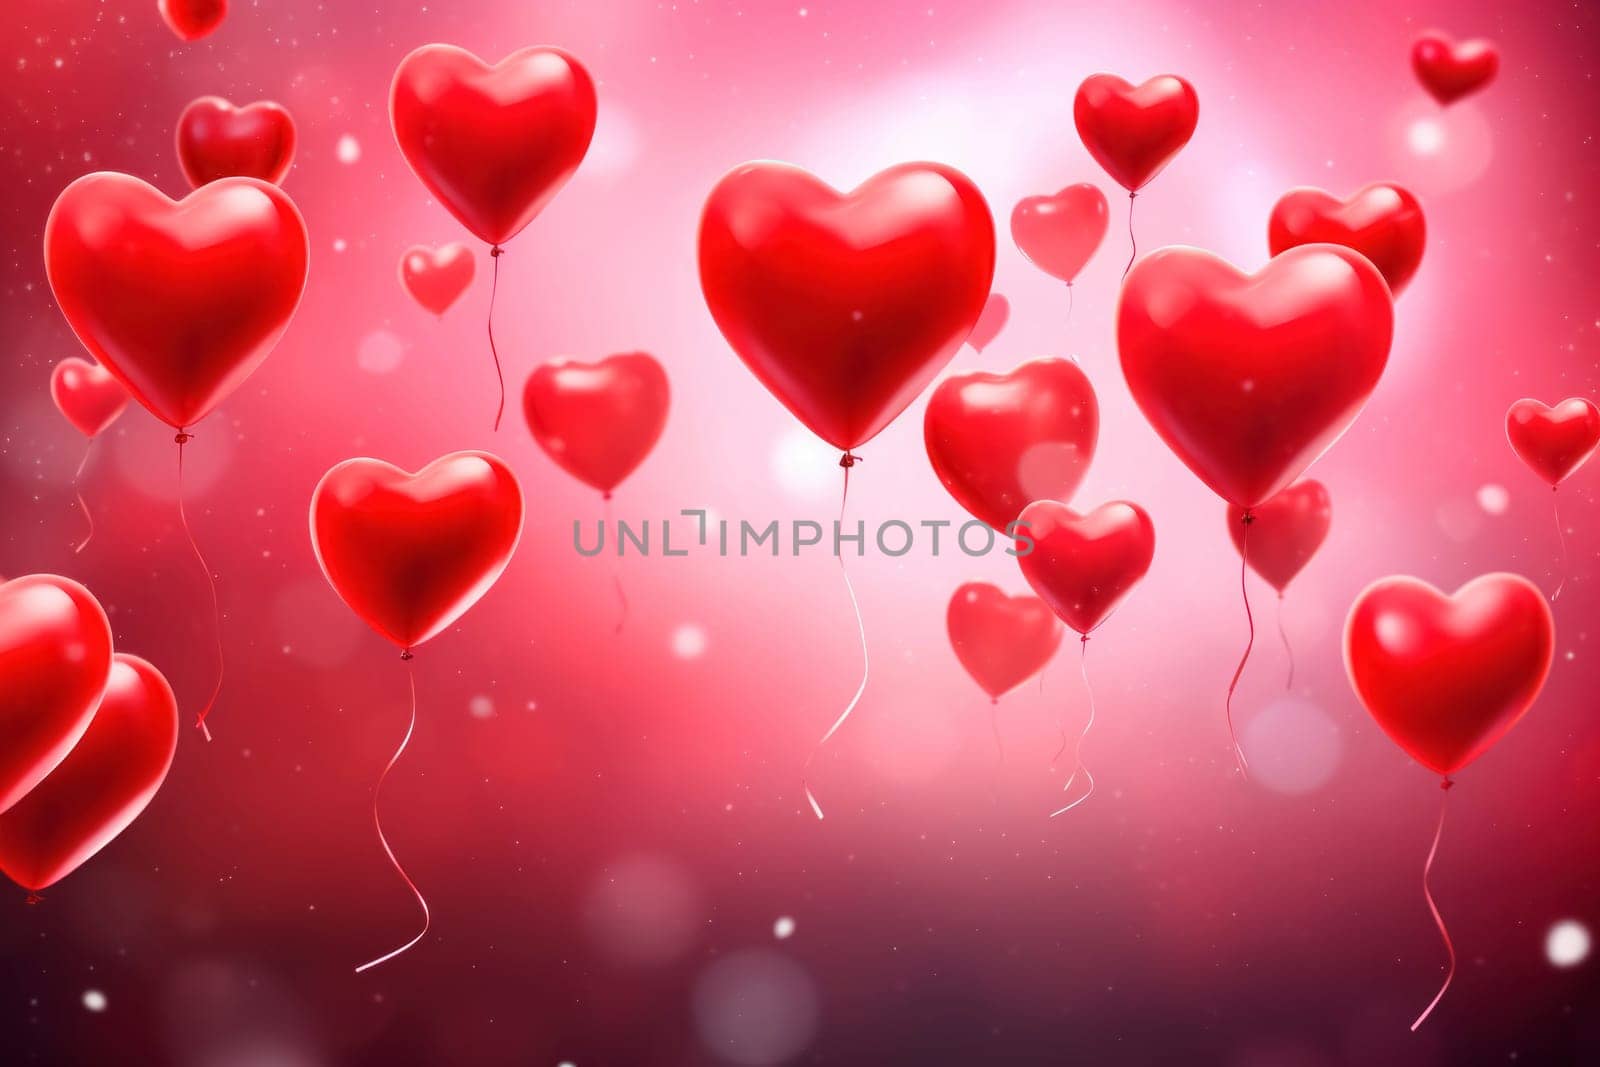 Enchanting red heart balloons rise in a magical pink mist, creating a whimsical and romantic atmosphere.